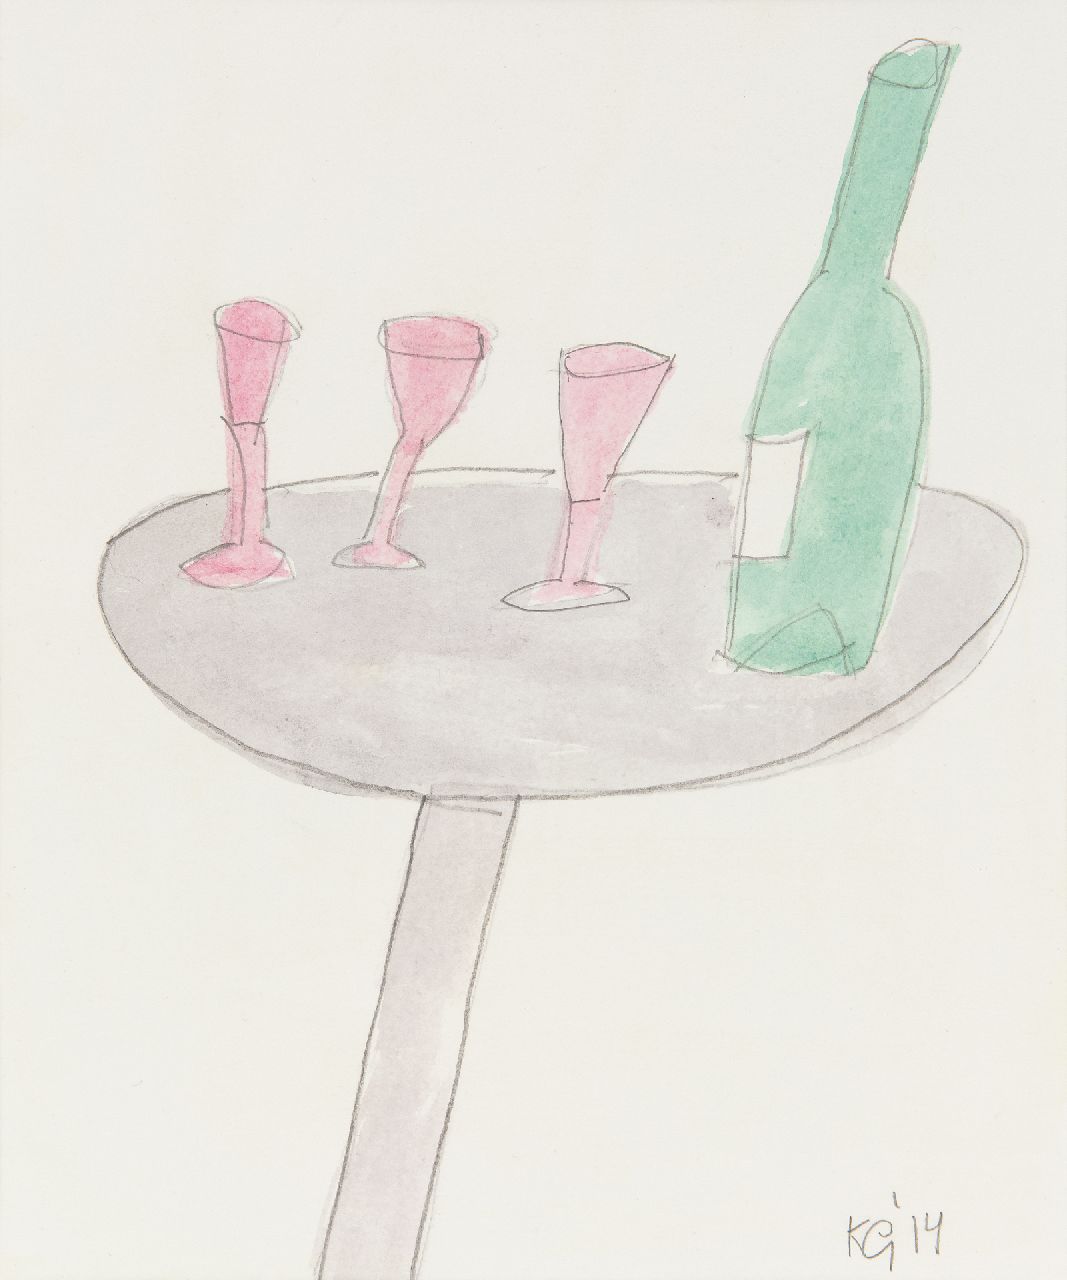 Gubbels K.  | Klaas Gubbels | Watercolours and drawings offered for sale | Glasses and bottle on a table, pencil and watercolour on paper 24.0 x 20.0 cm, signed l.r. and dated 2014